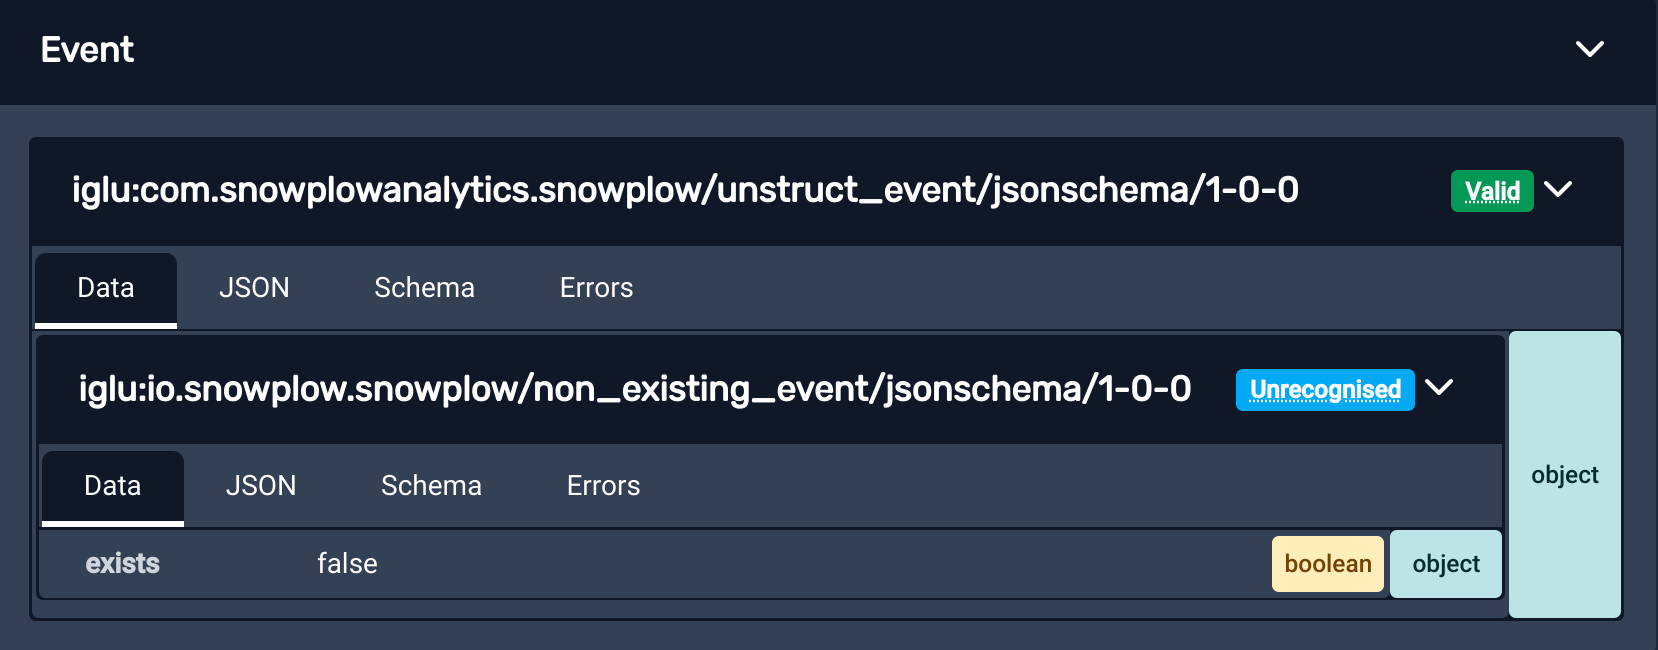 A Self Describing Event called &#39;example_event&#39; is displayed in the Snowplow Inspector extension. It contains a property &#39;example_field_1&#39; with the value &#39;abc&#39;. The extension says the event&#39;s schema is Unrecognized. A cursor graphic is overlaid to indicate this label can be clicked.